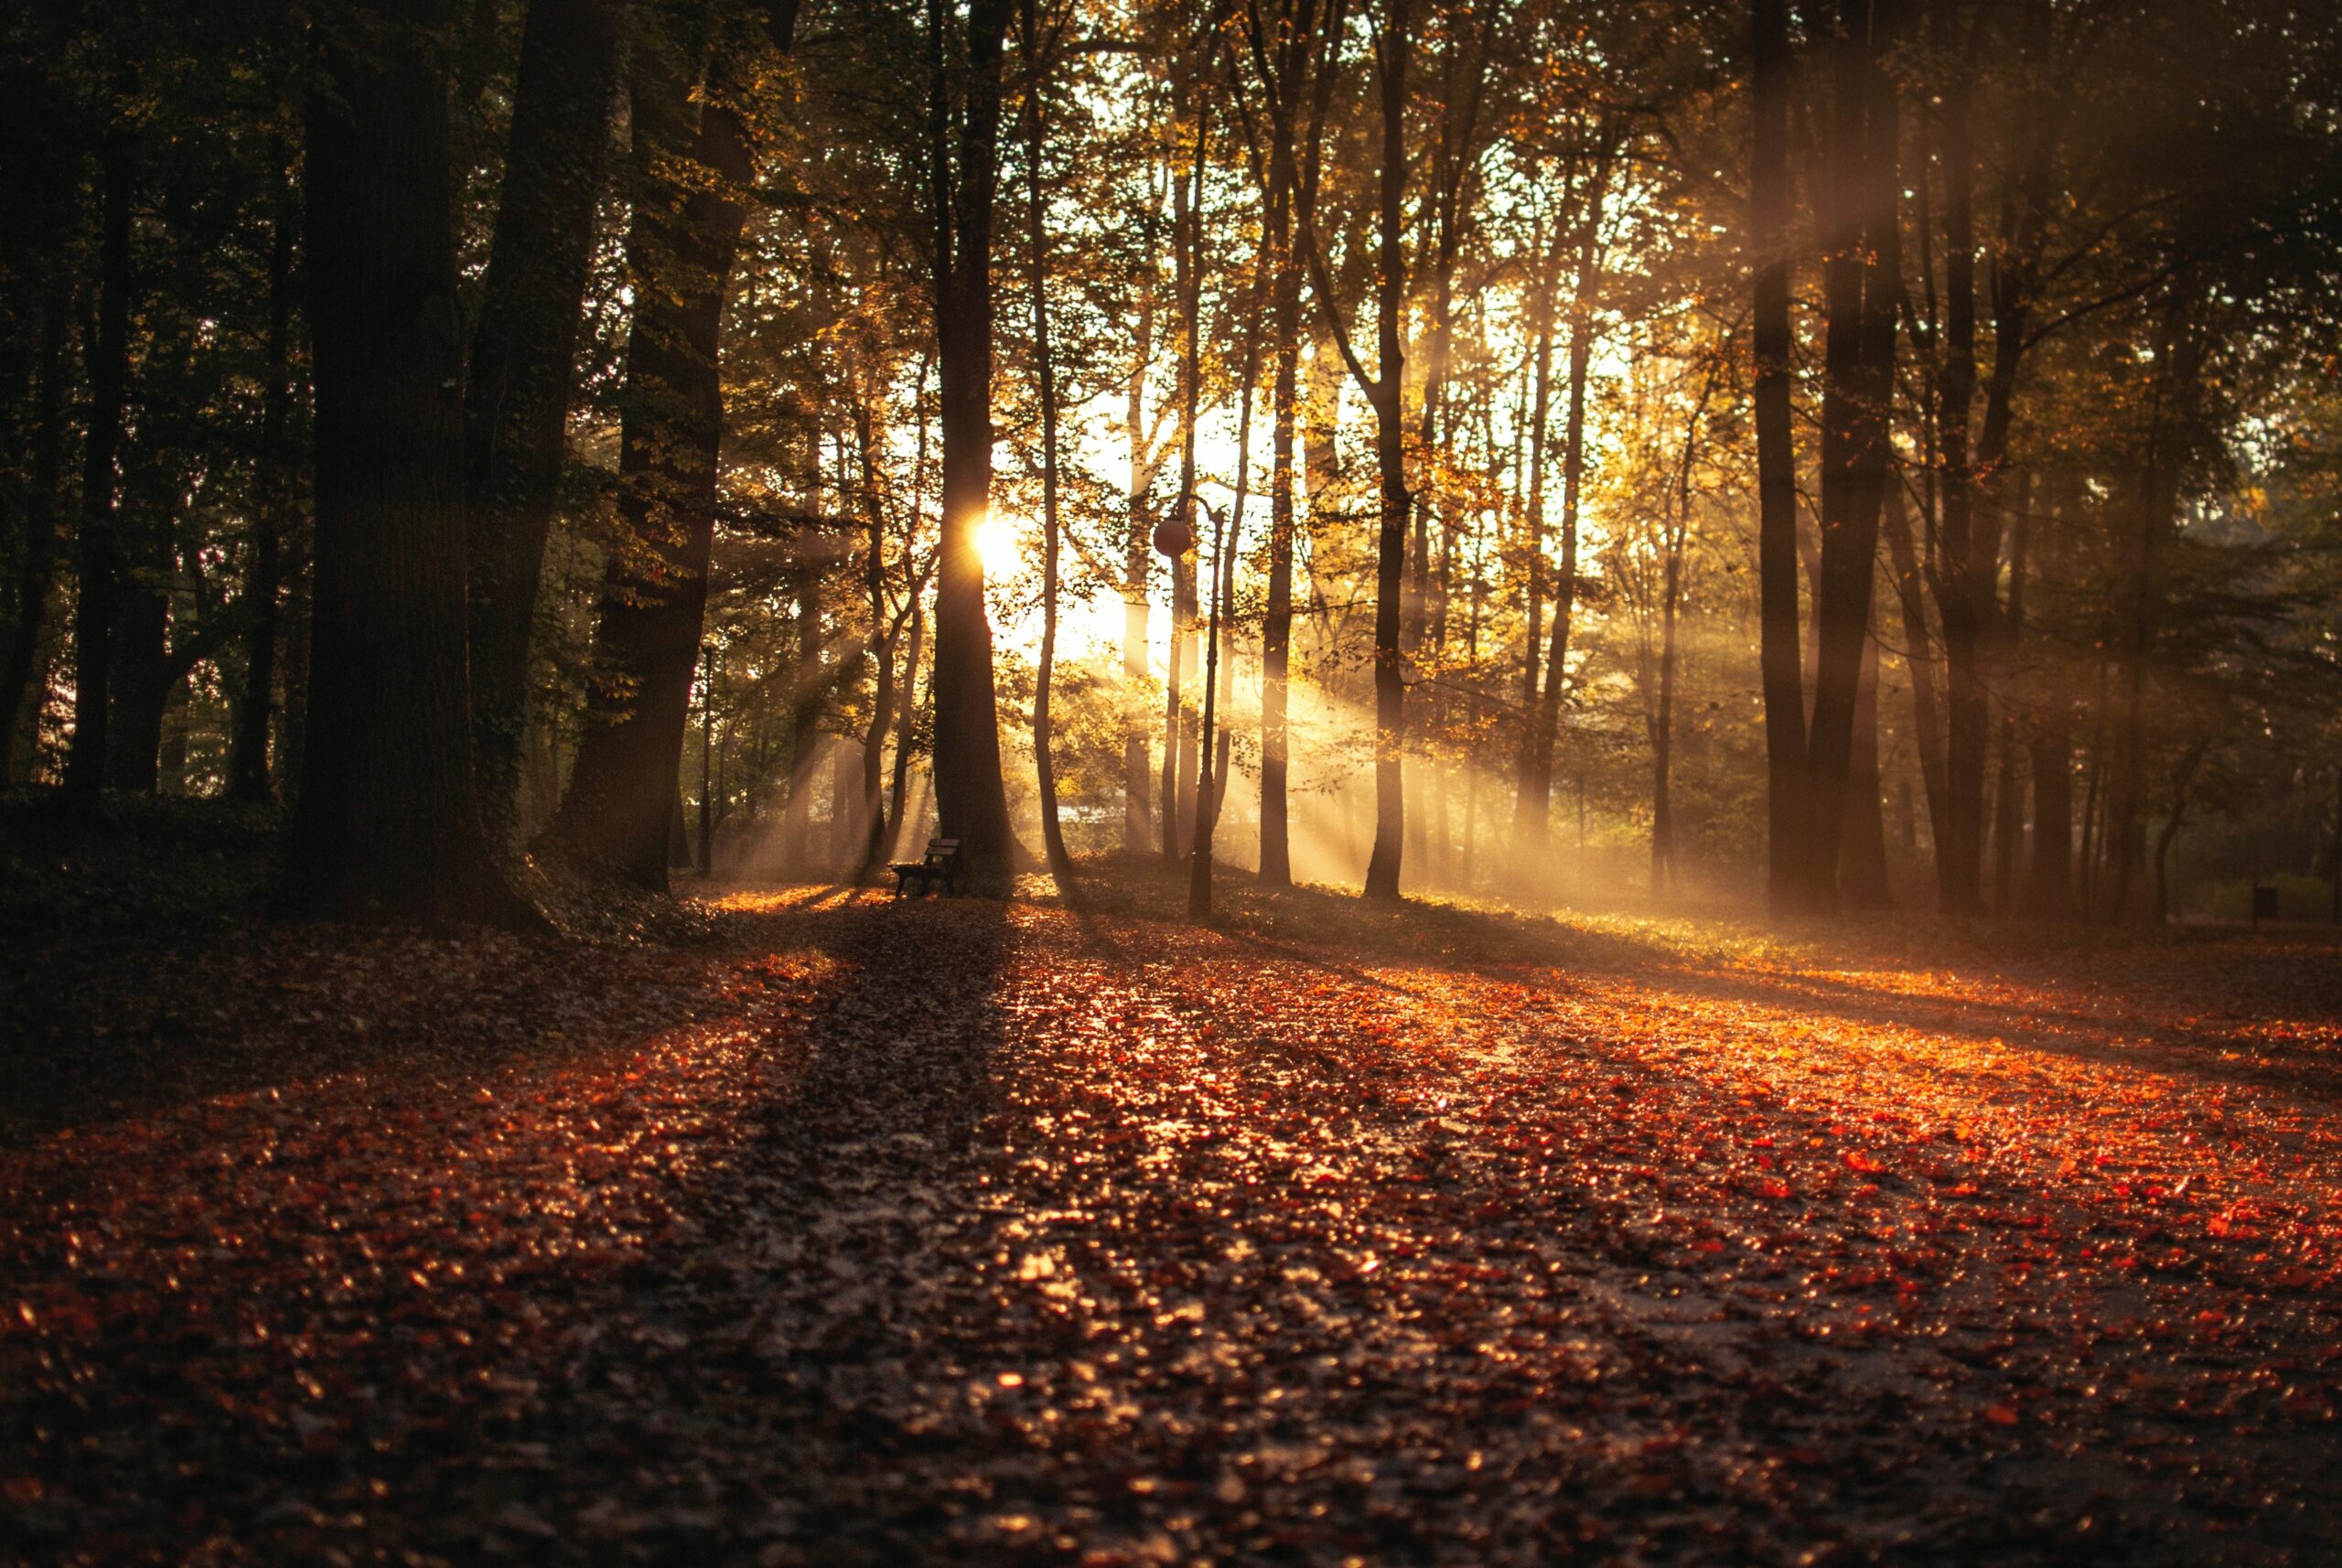 sunlight streaming through trees in a fall wood